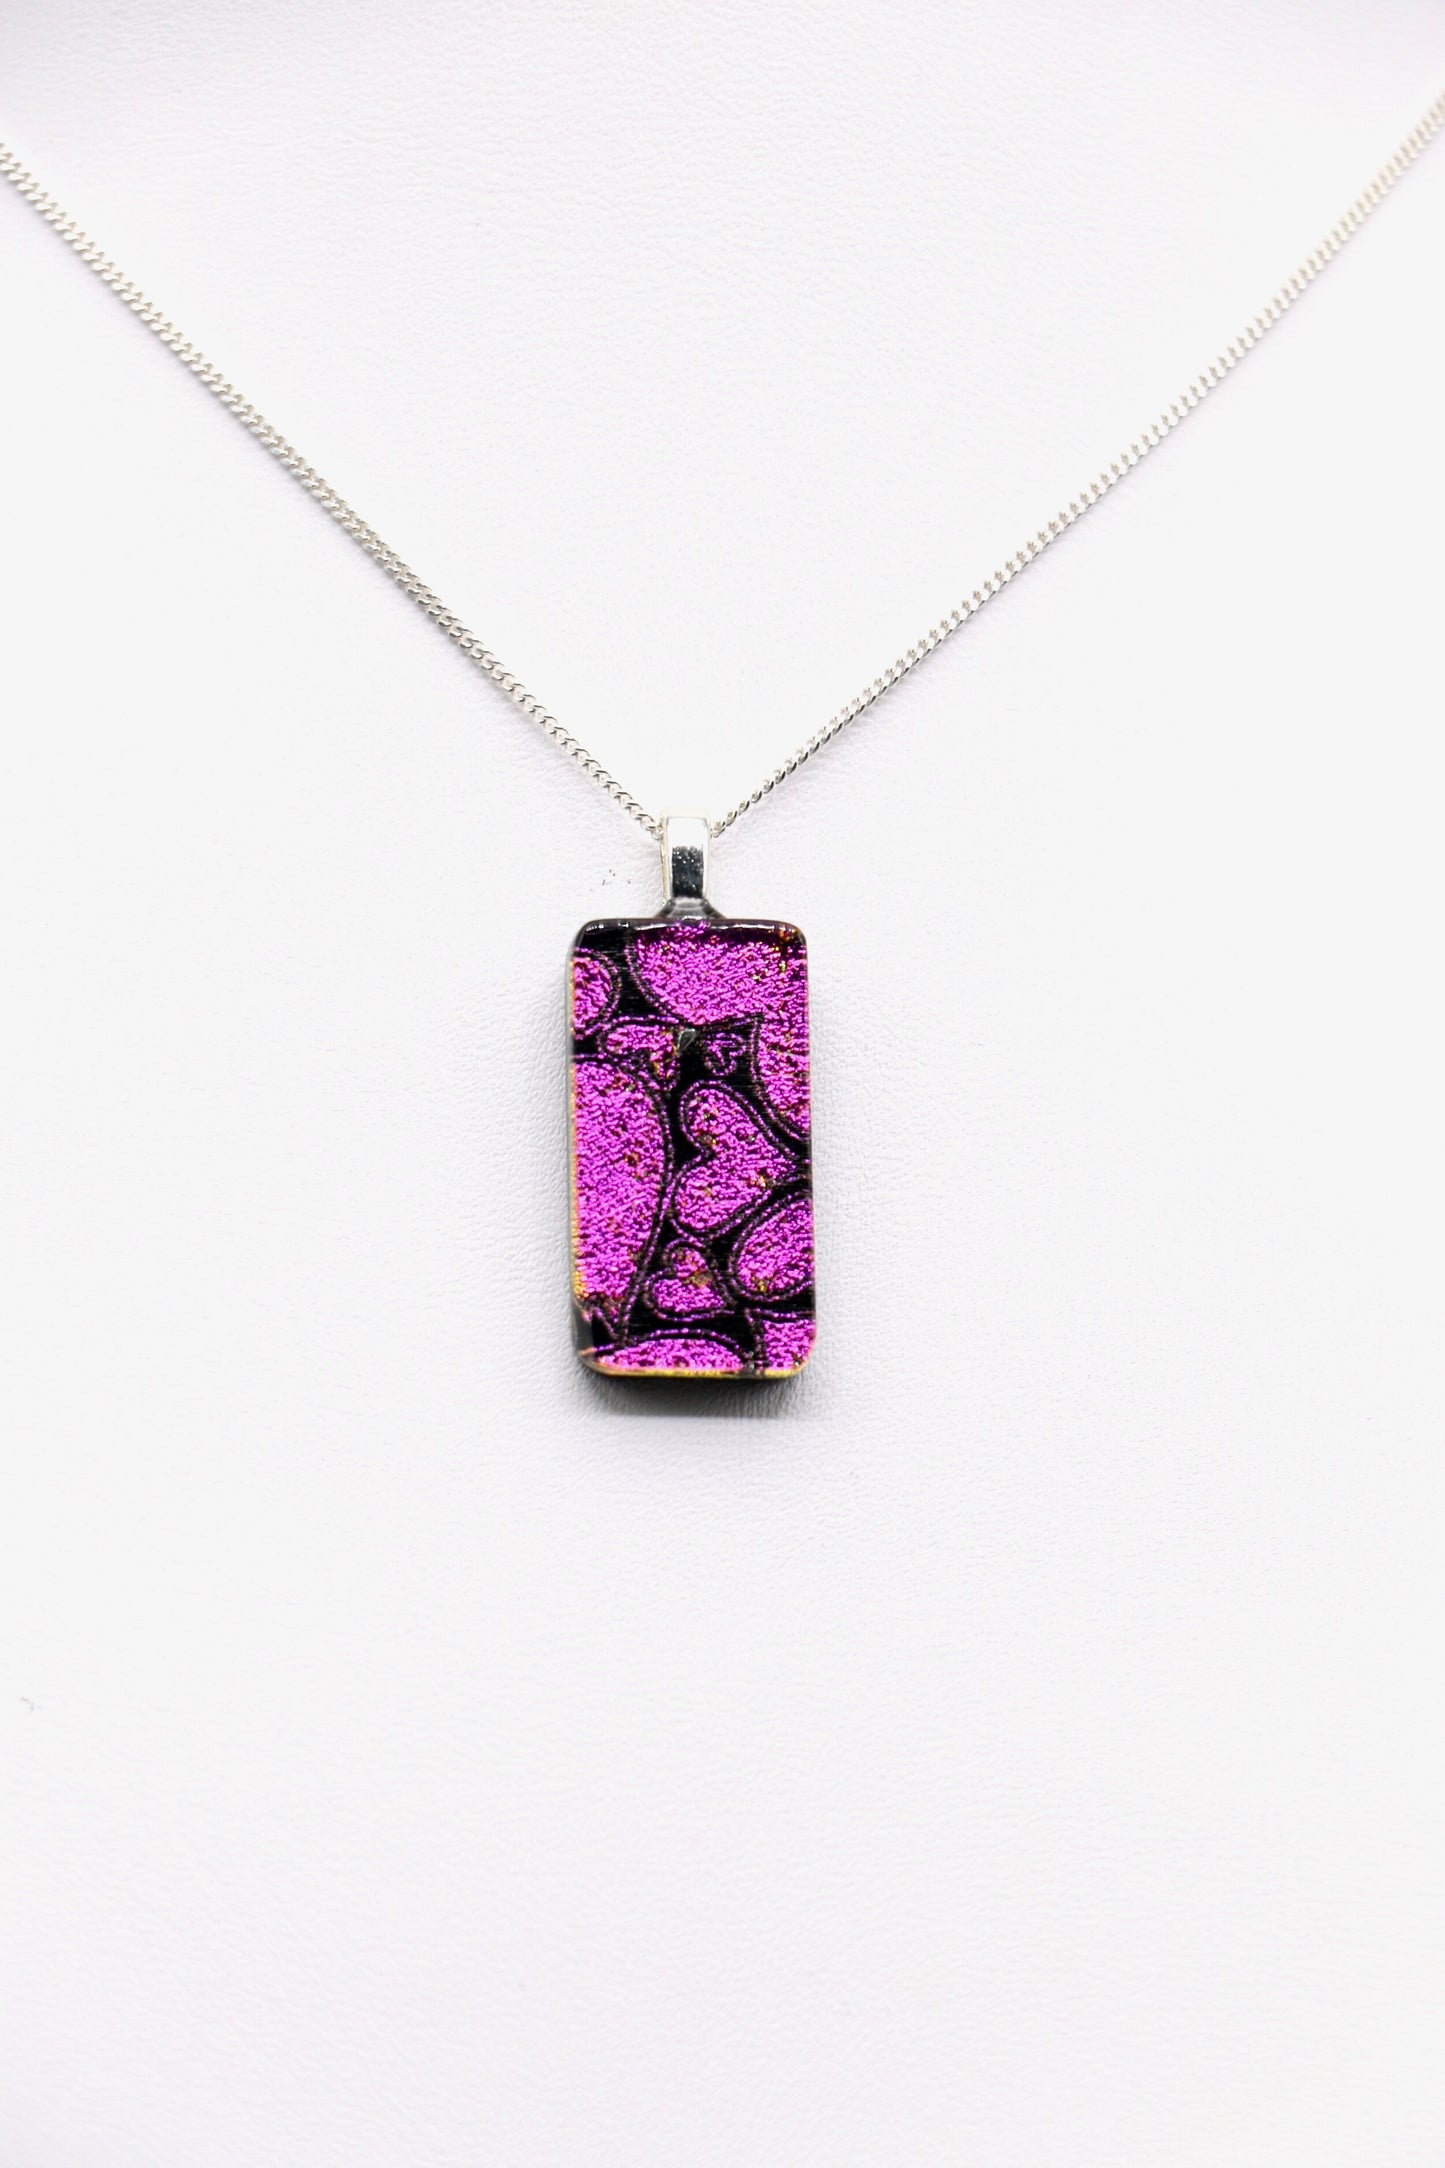 Fused Glass Necklace - 2722